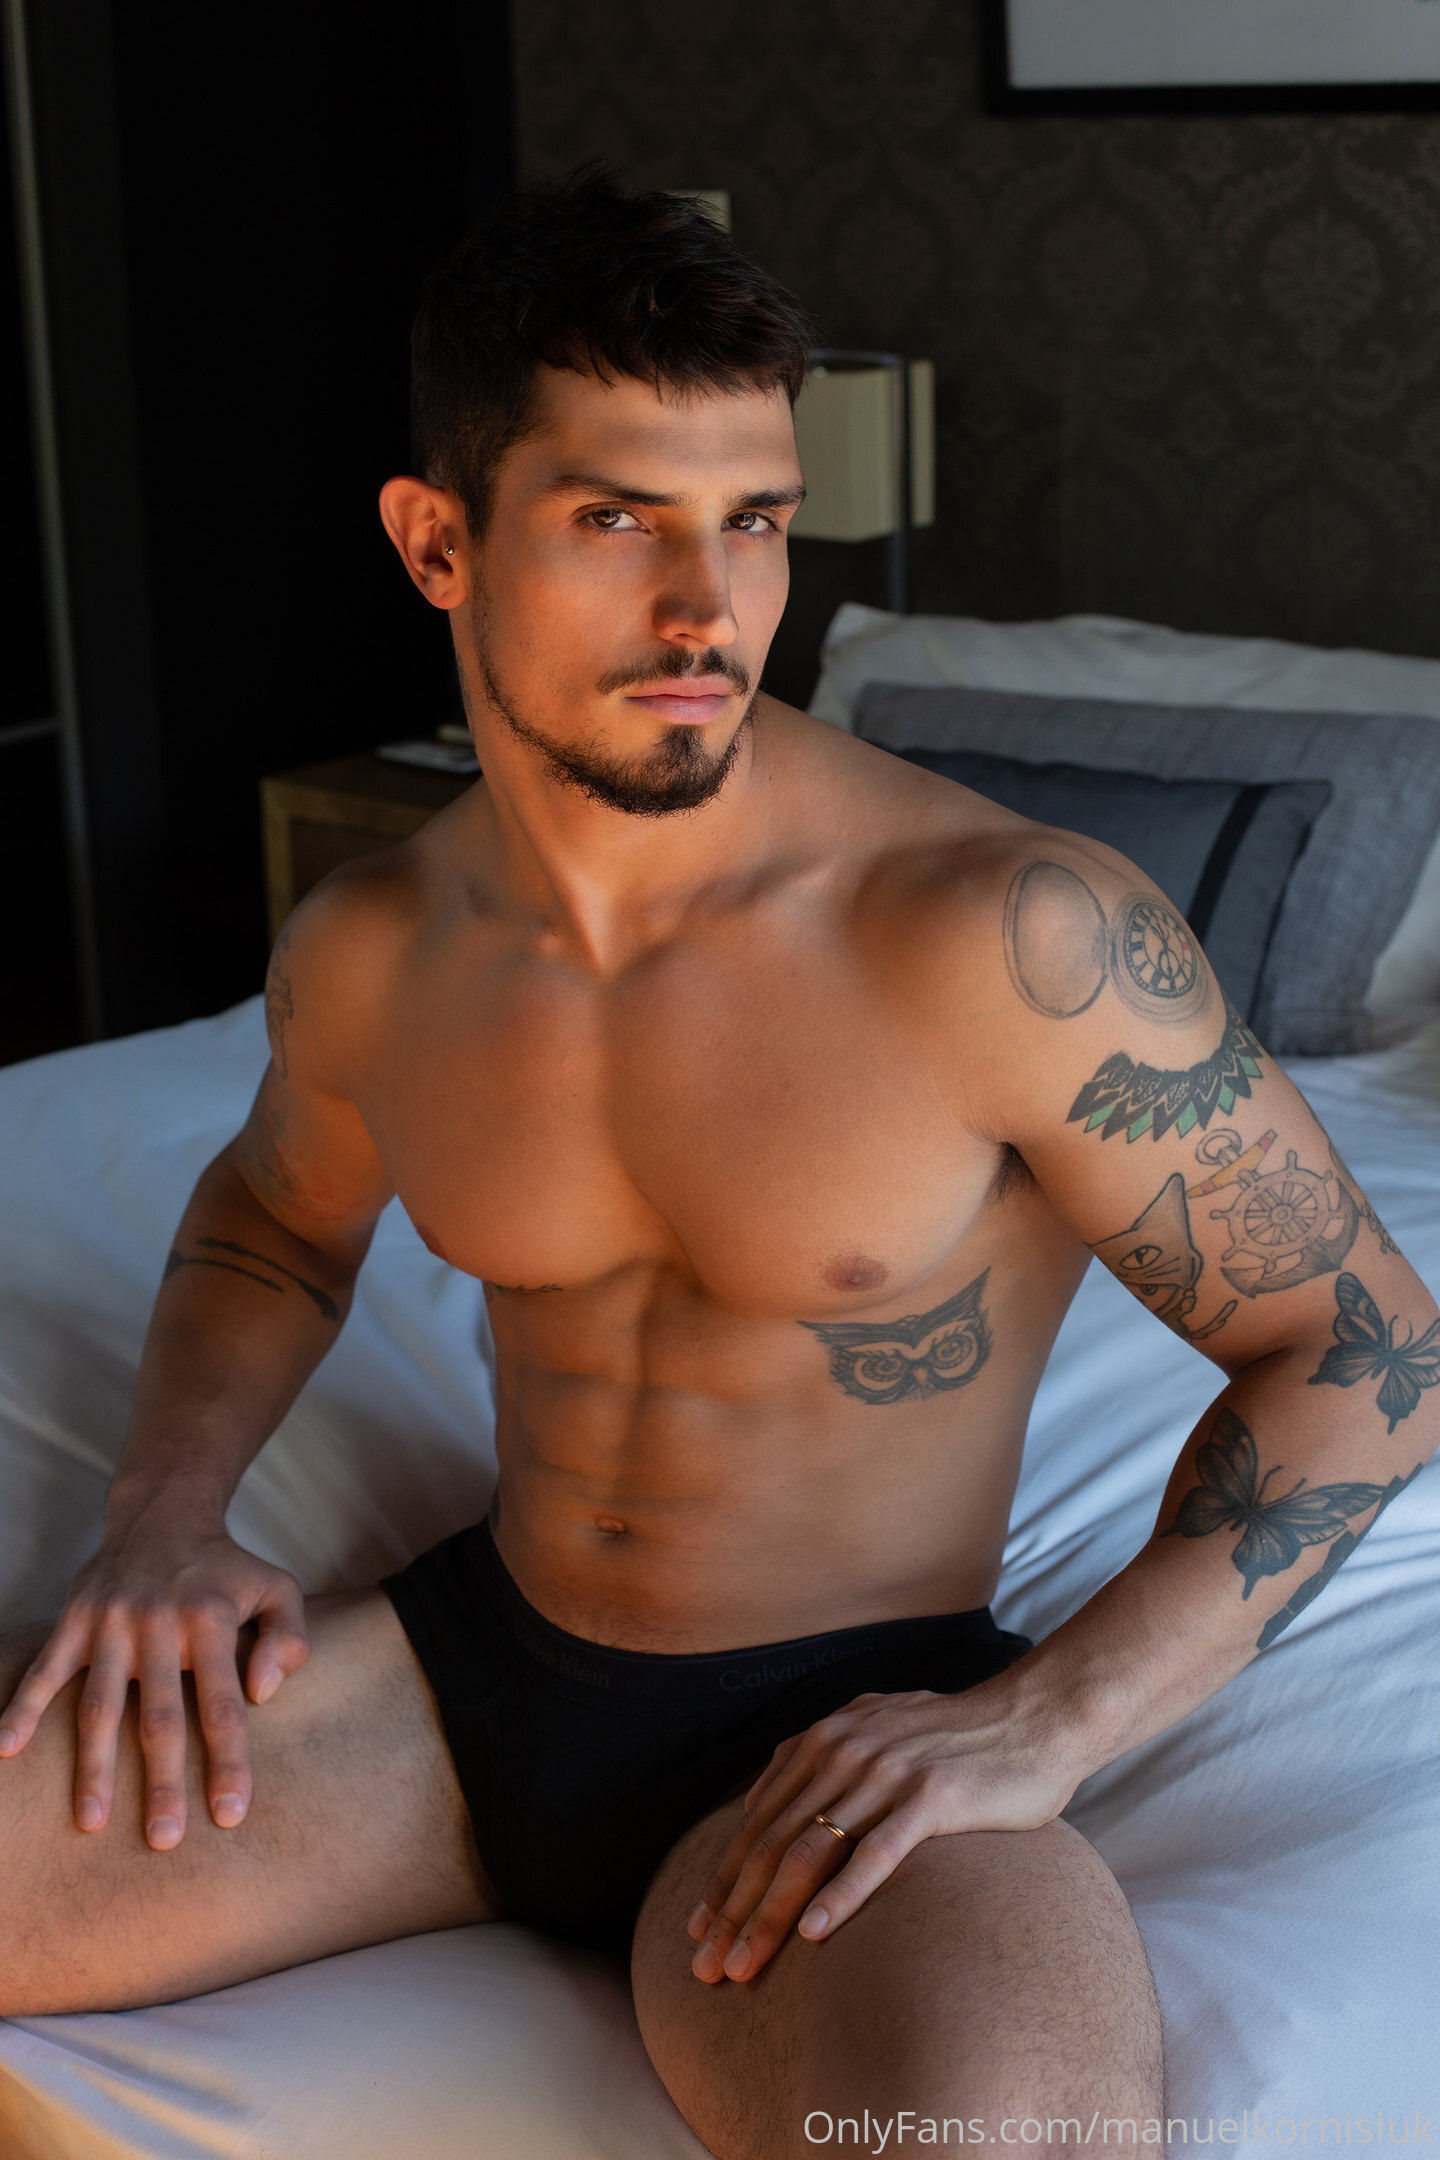 Mickey nucci onlyfans